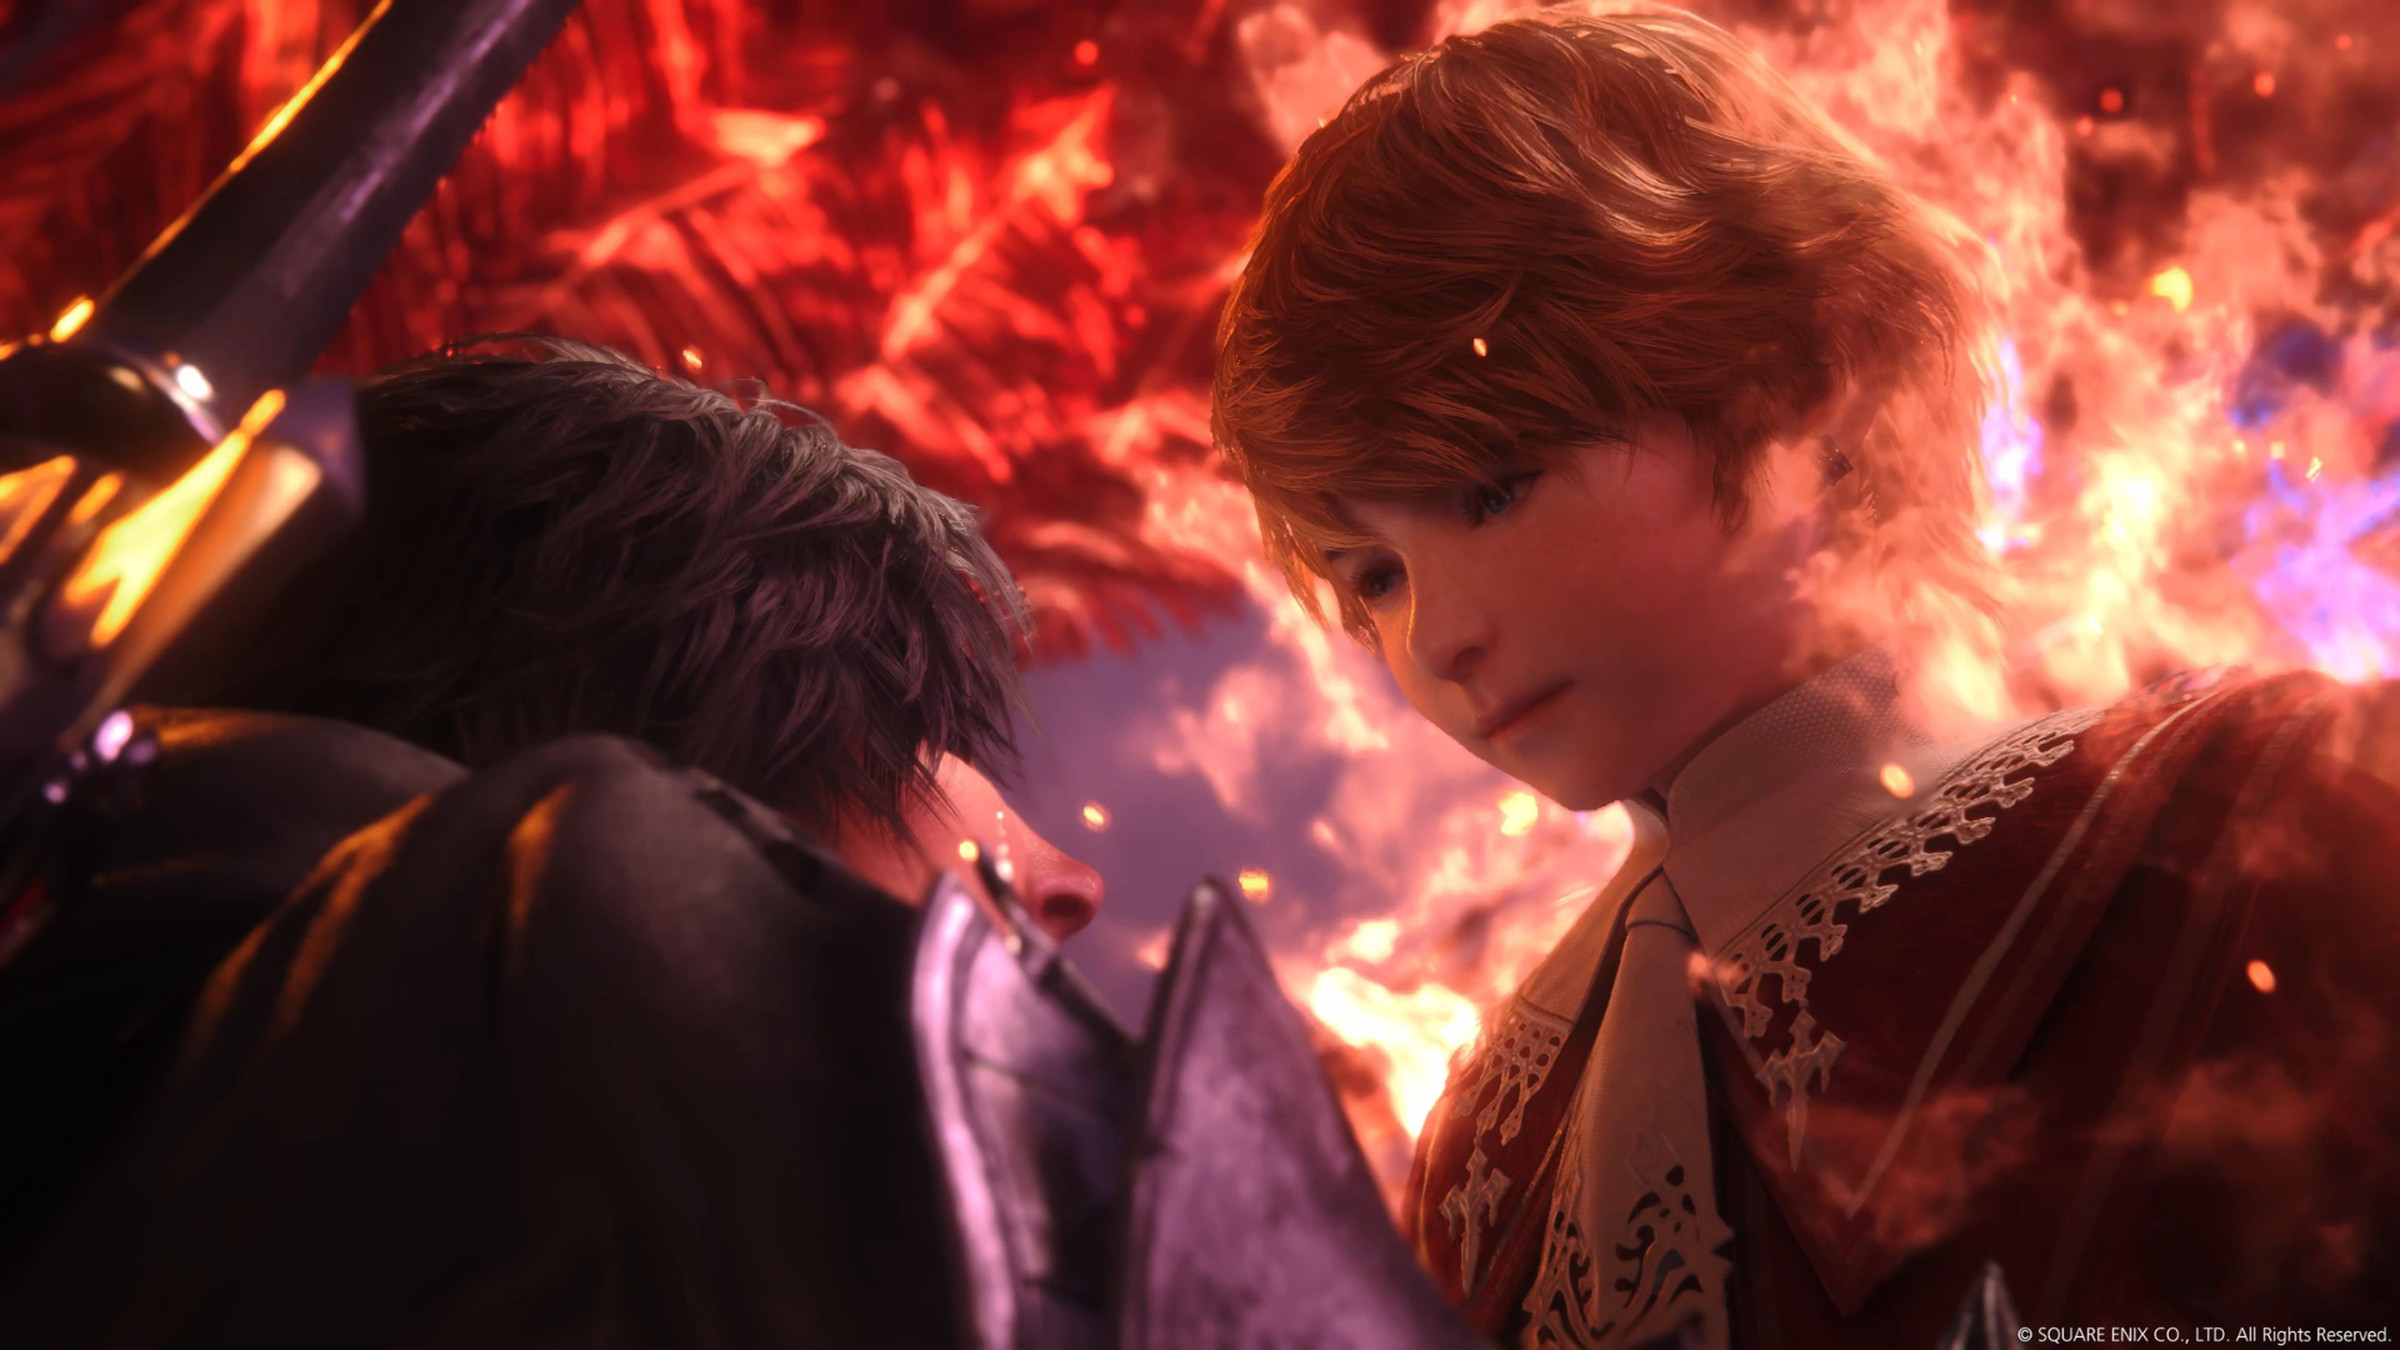 Screenshot from Final Fantasy XVI featuring the brothers Clive and Joshua embracing, wreathed in flames.